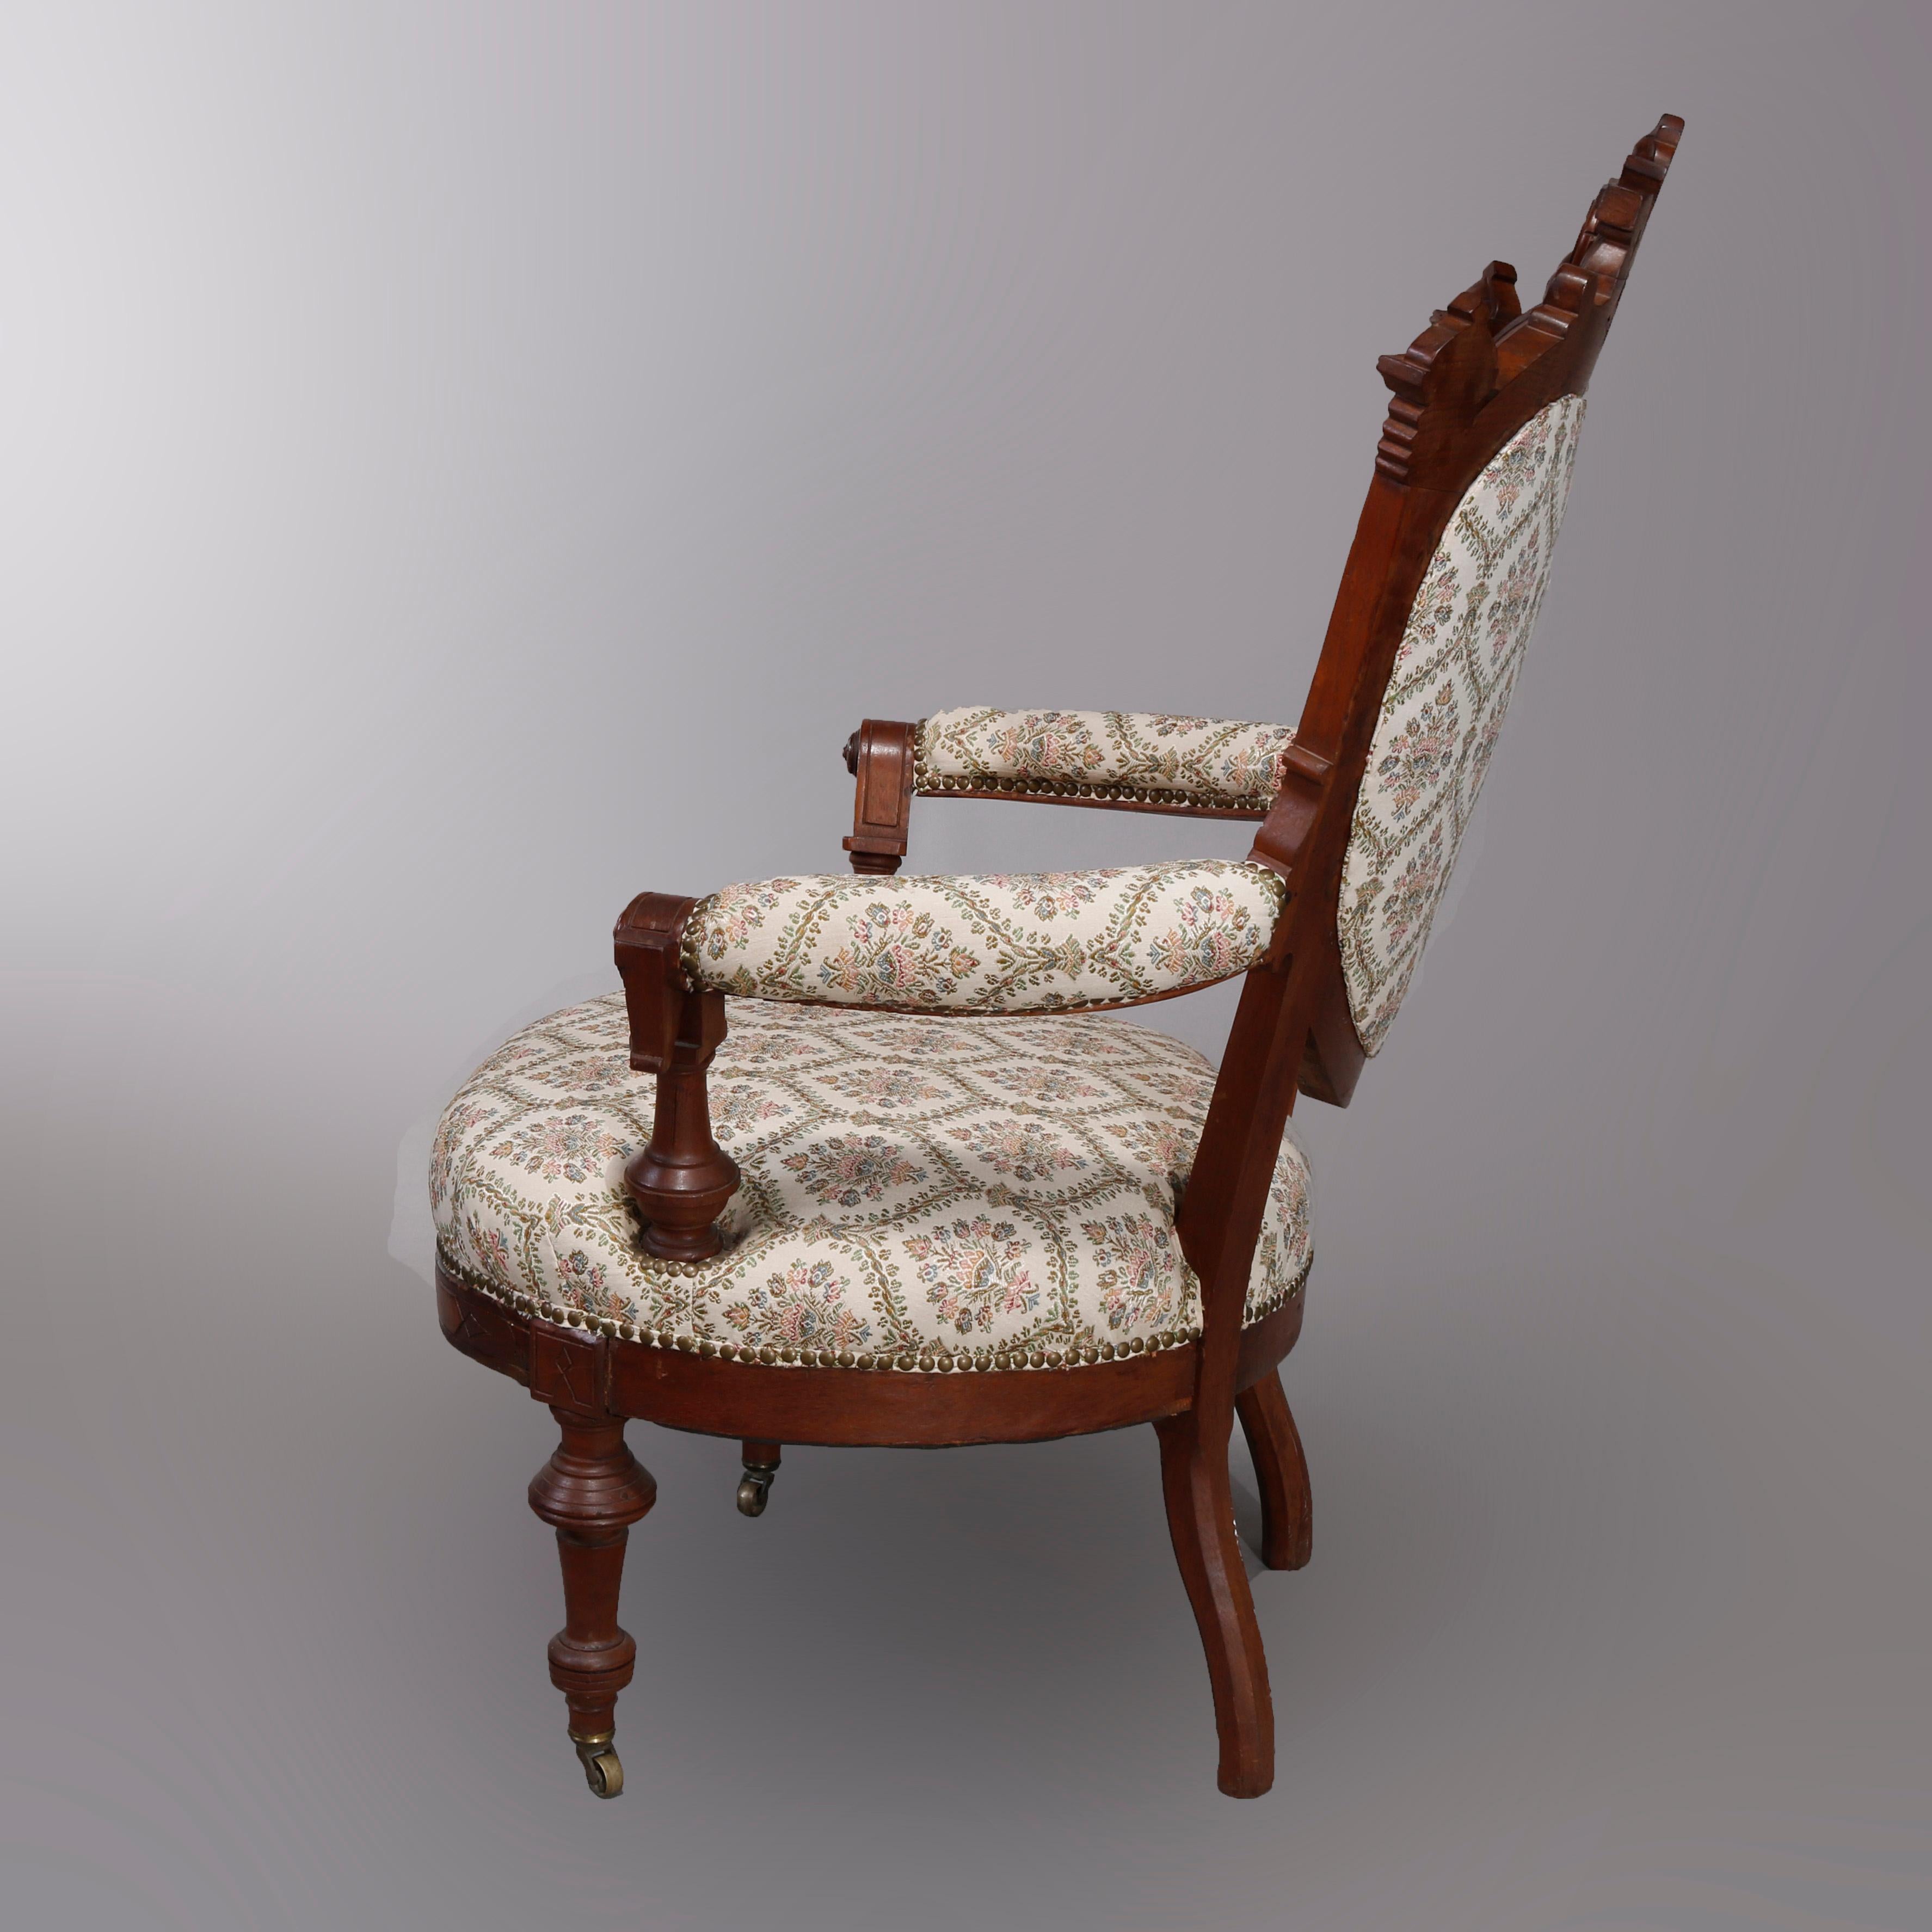 Upholstery Antique Renaissance Revival Walnut & Burl Parlor Armchairs with Marquetry, c1880 For Sale